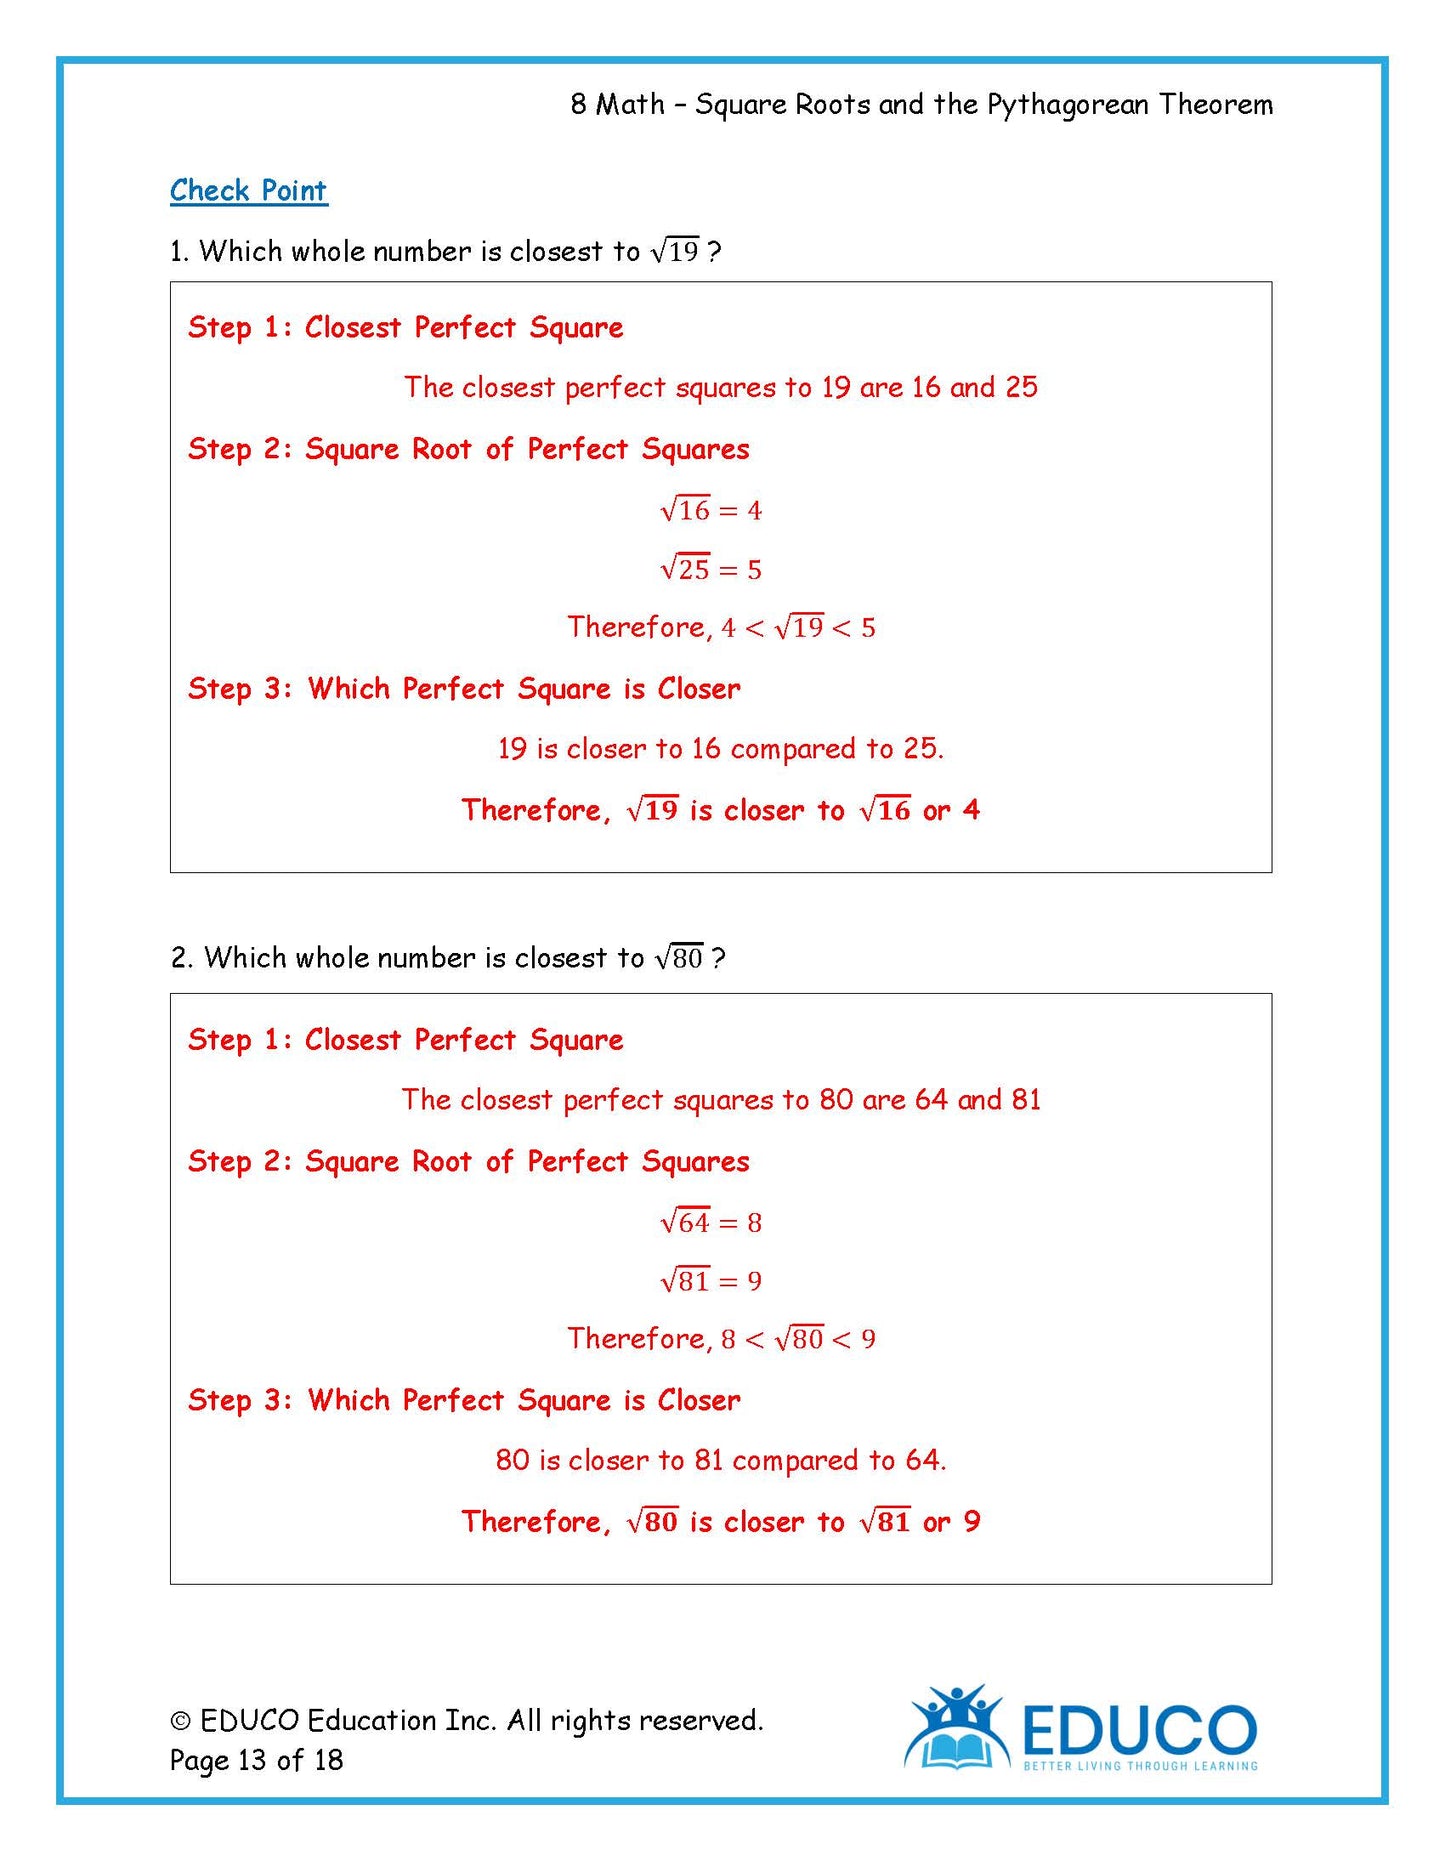 Unit 1: Square Roots and the Pythagorean Theorem - Grade 8 Math (Digital Download)